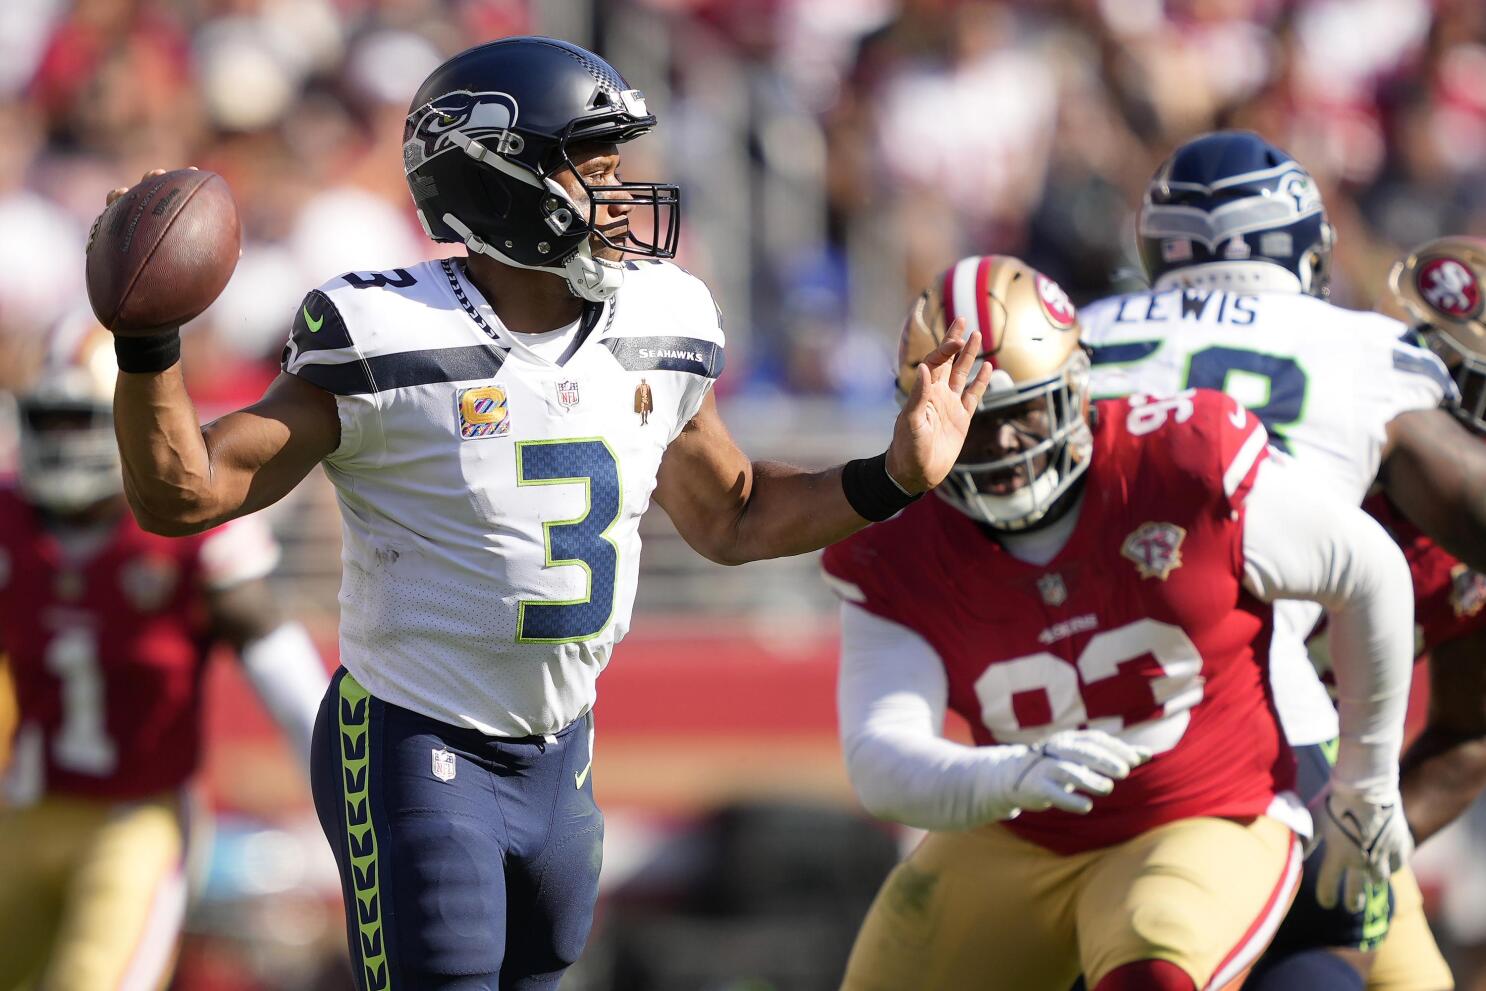 Seahawks manage to end skid, but real test comes this week